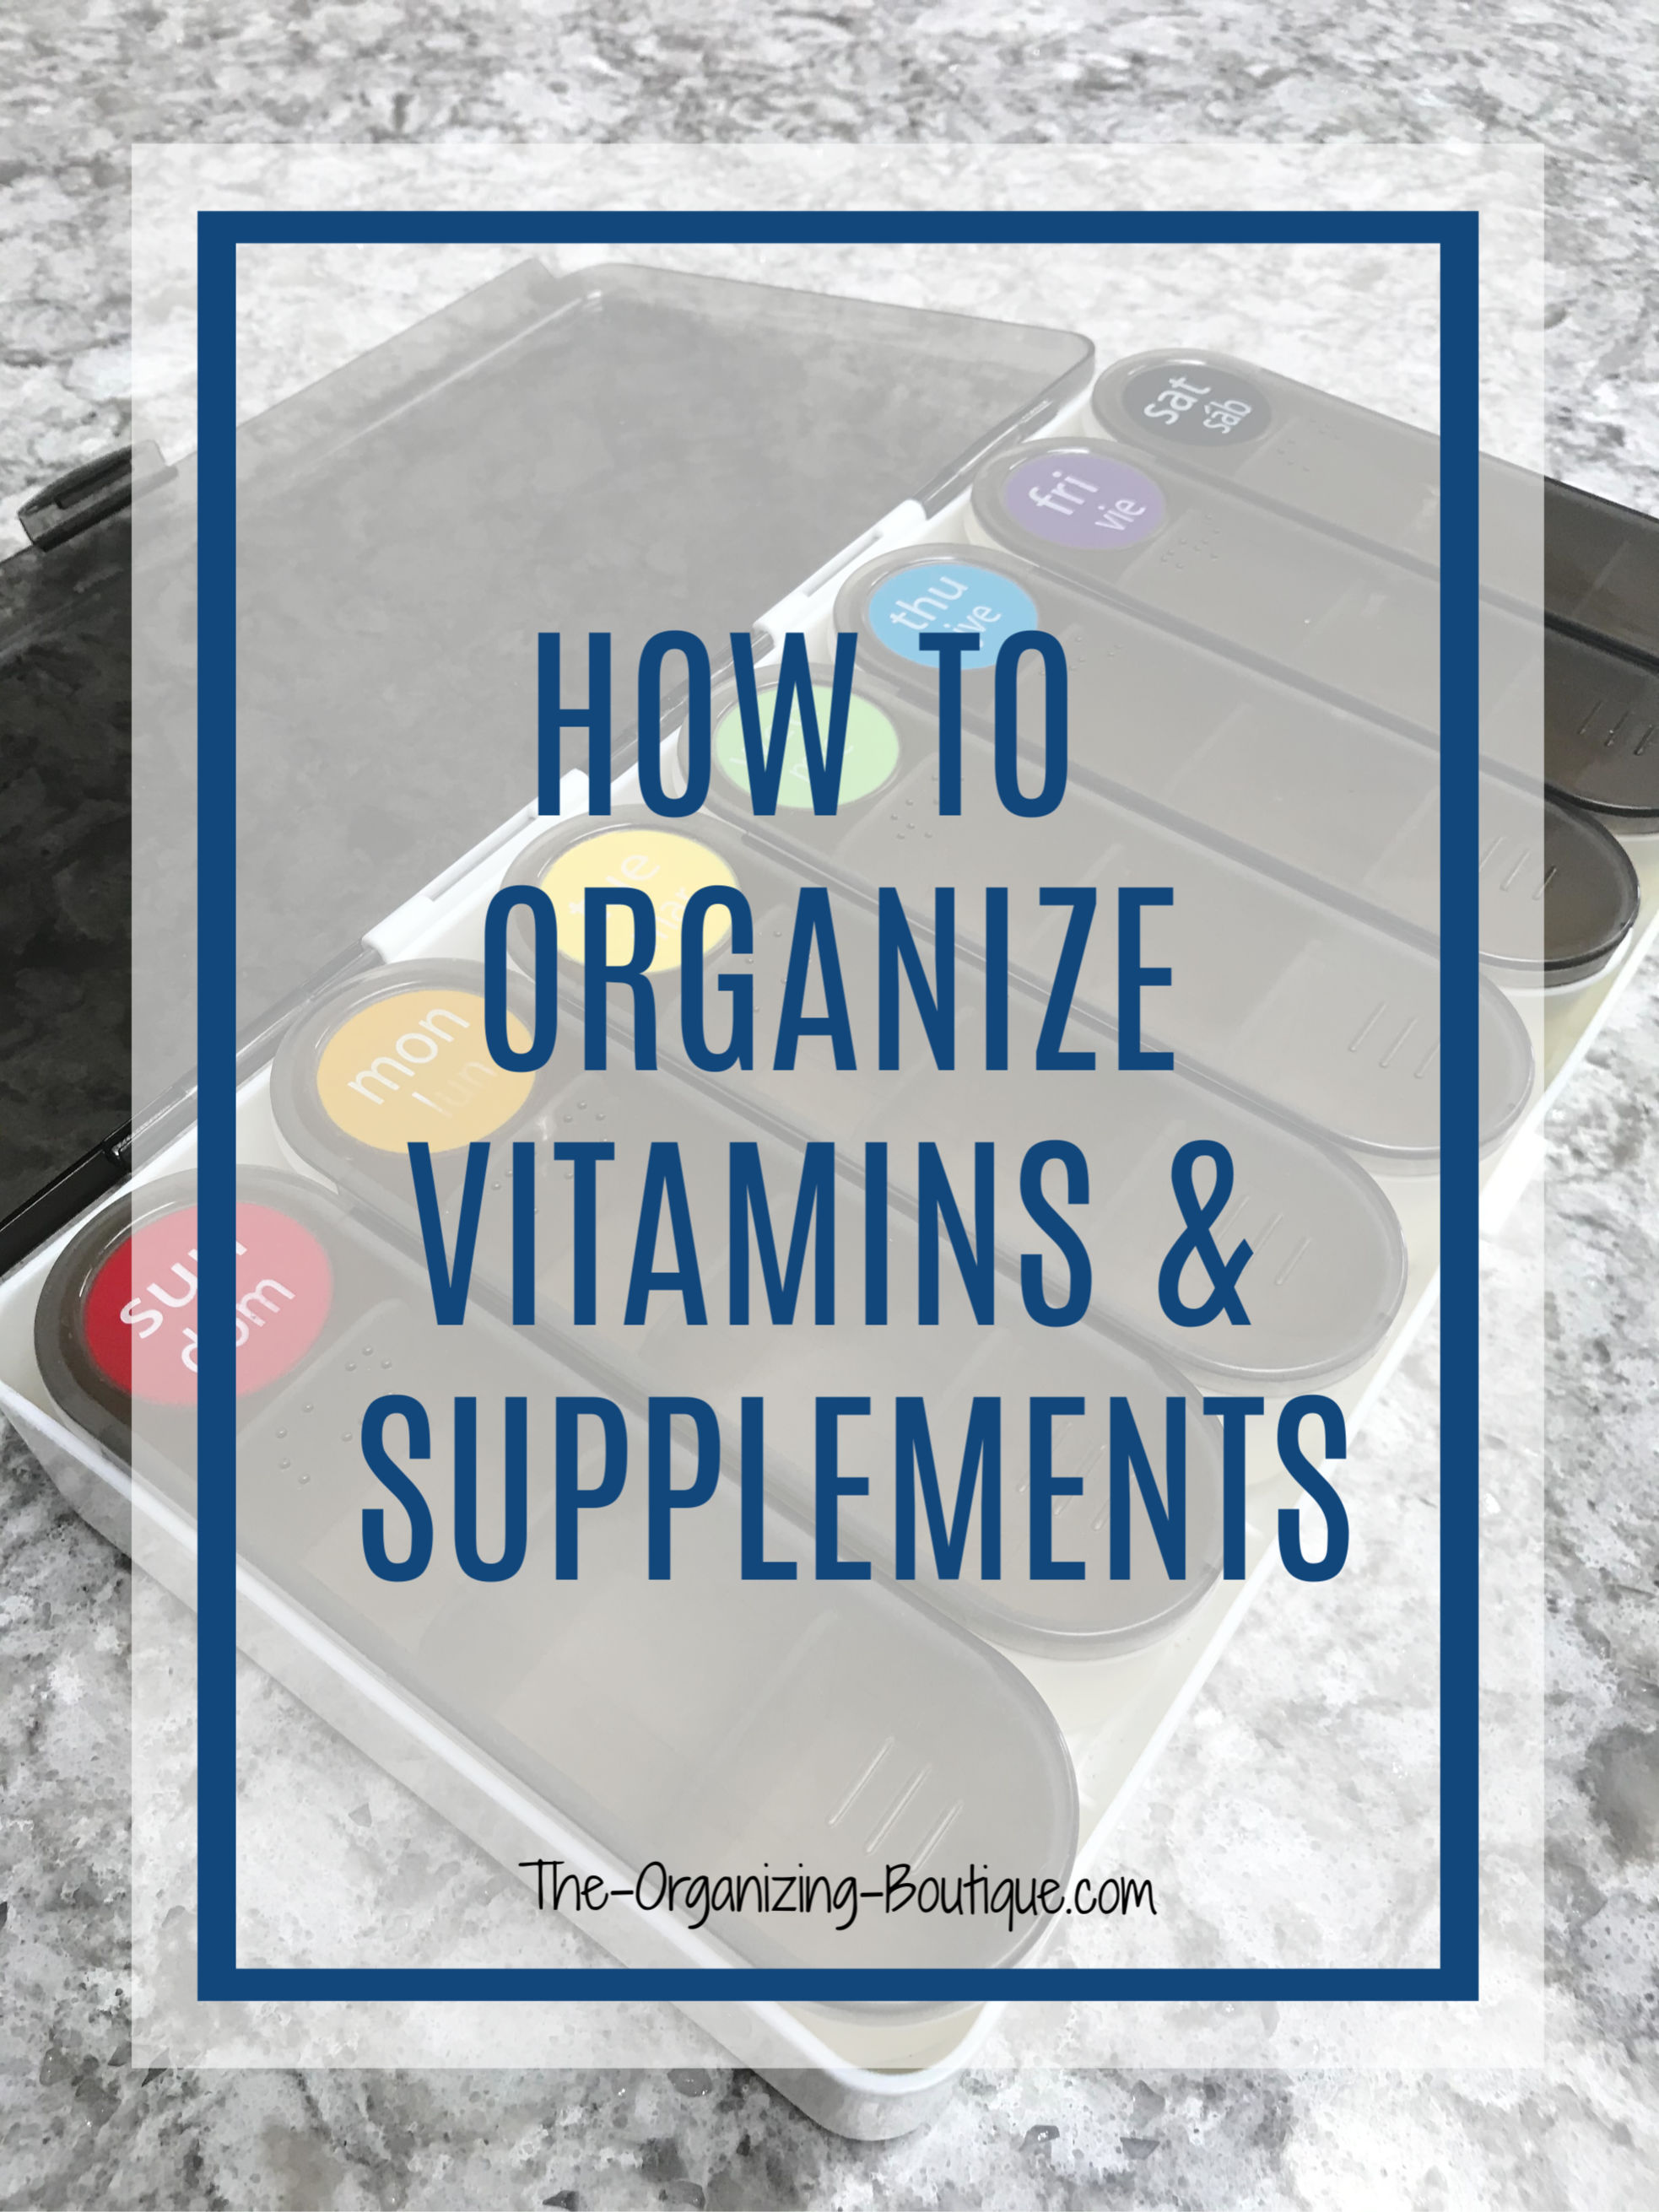 https://www.the-organizing-boutique.com/images/How-To-Organize-Vitamins.jpg